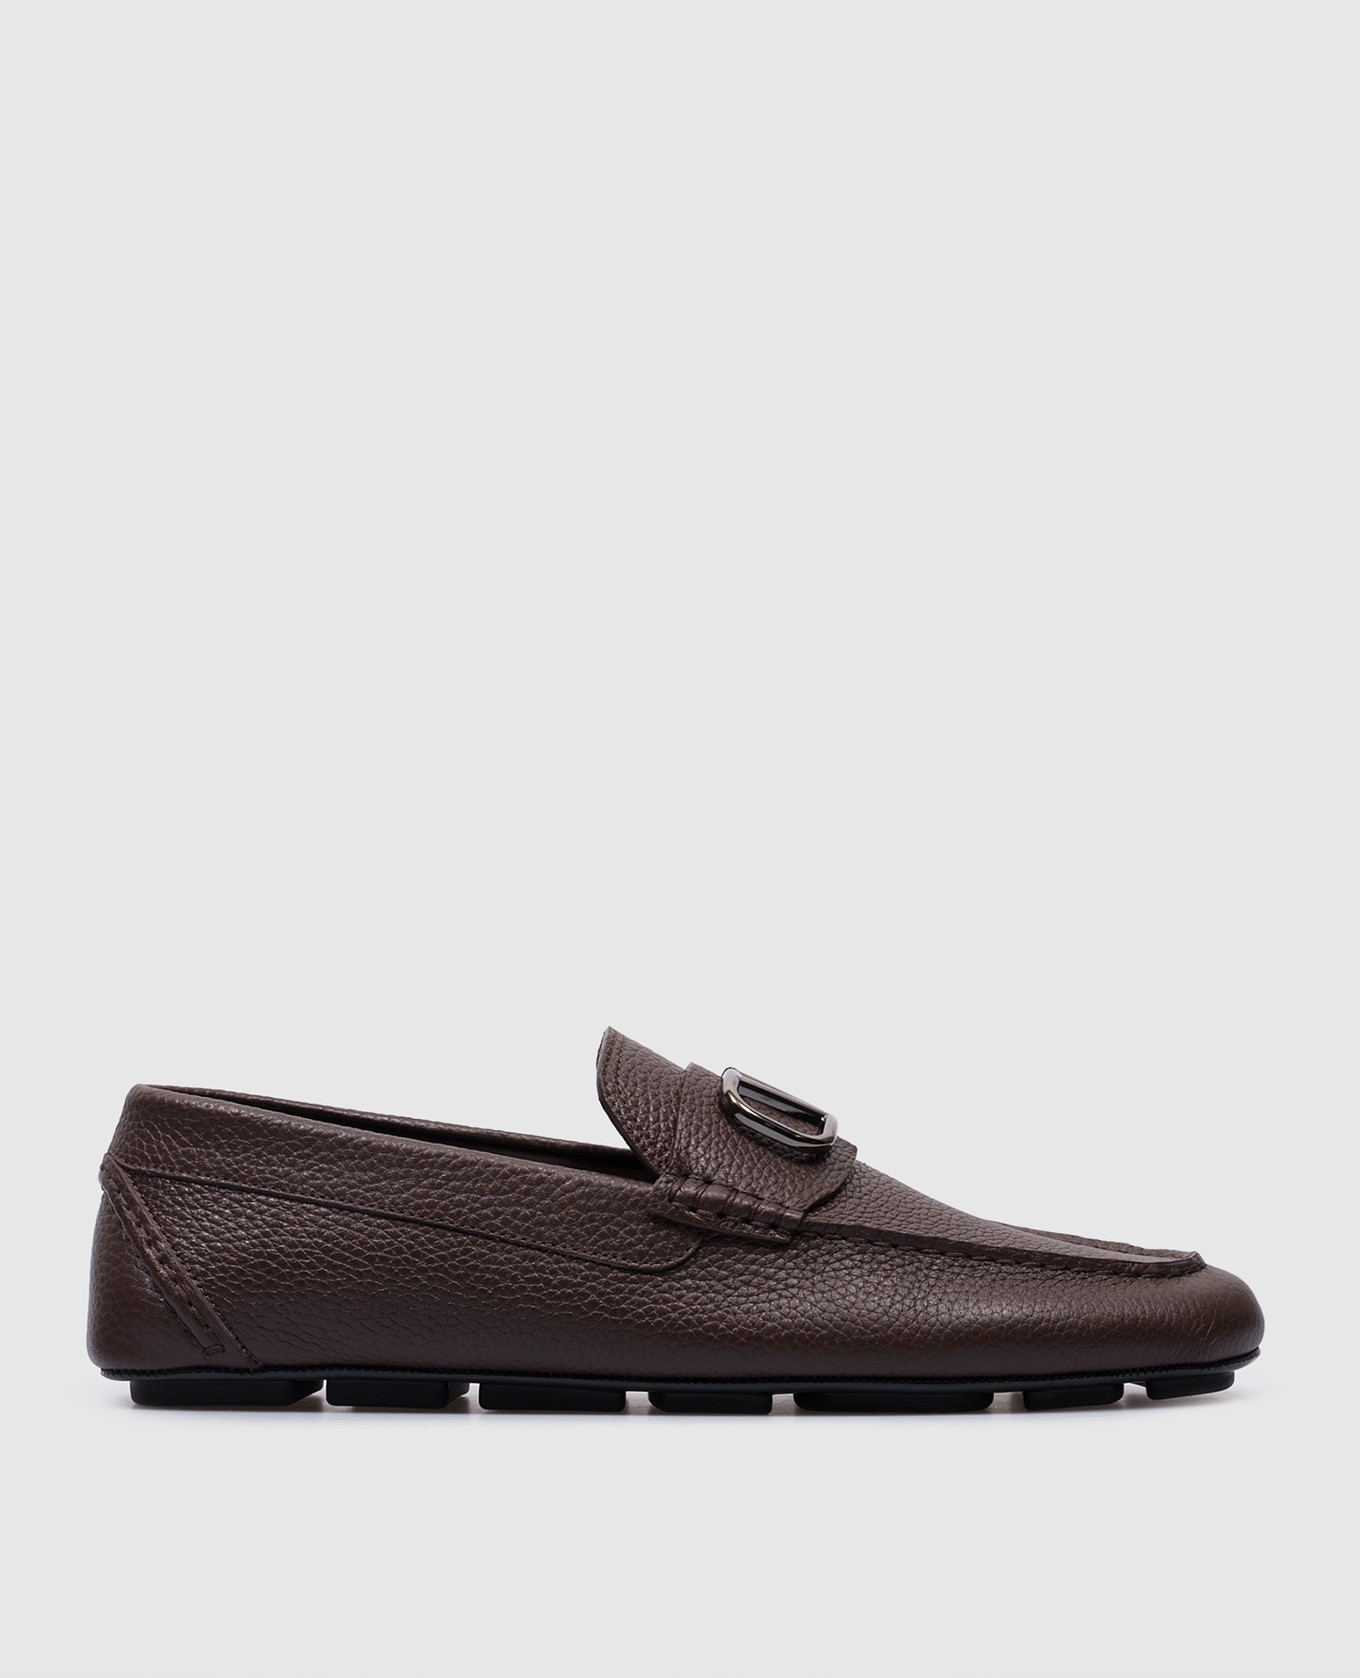 Vlogo Signature logo moccasins in brown leather